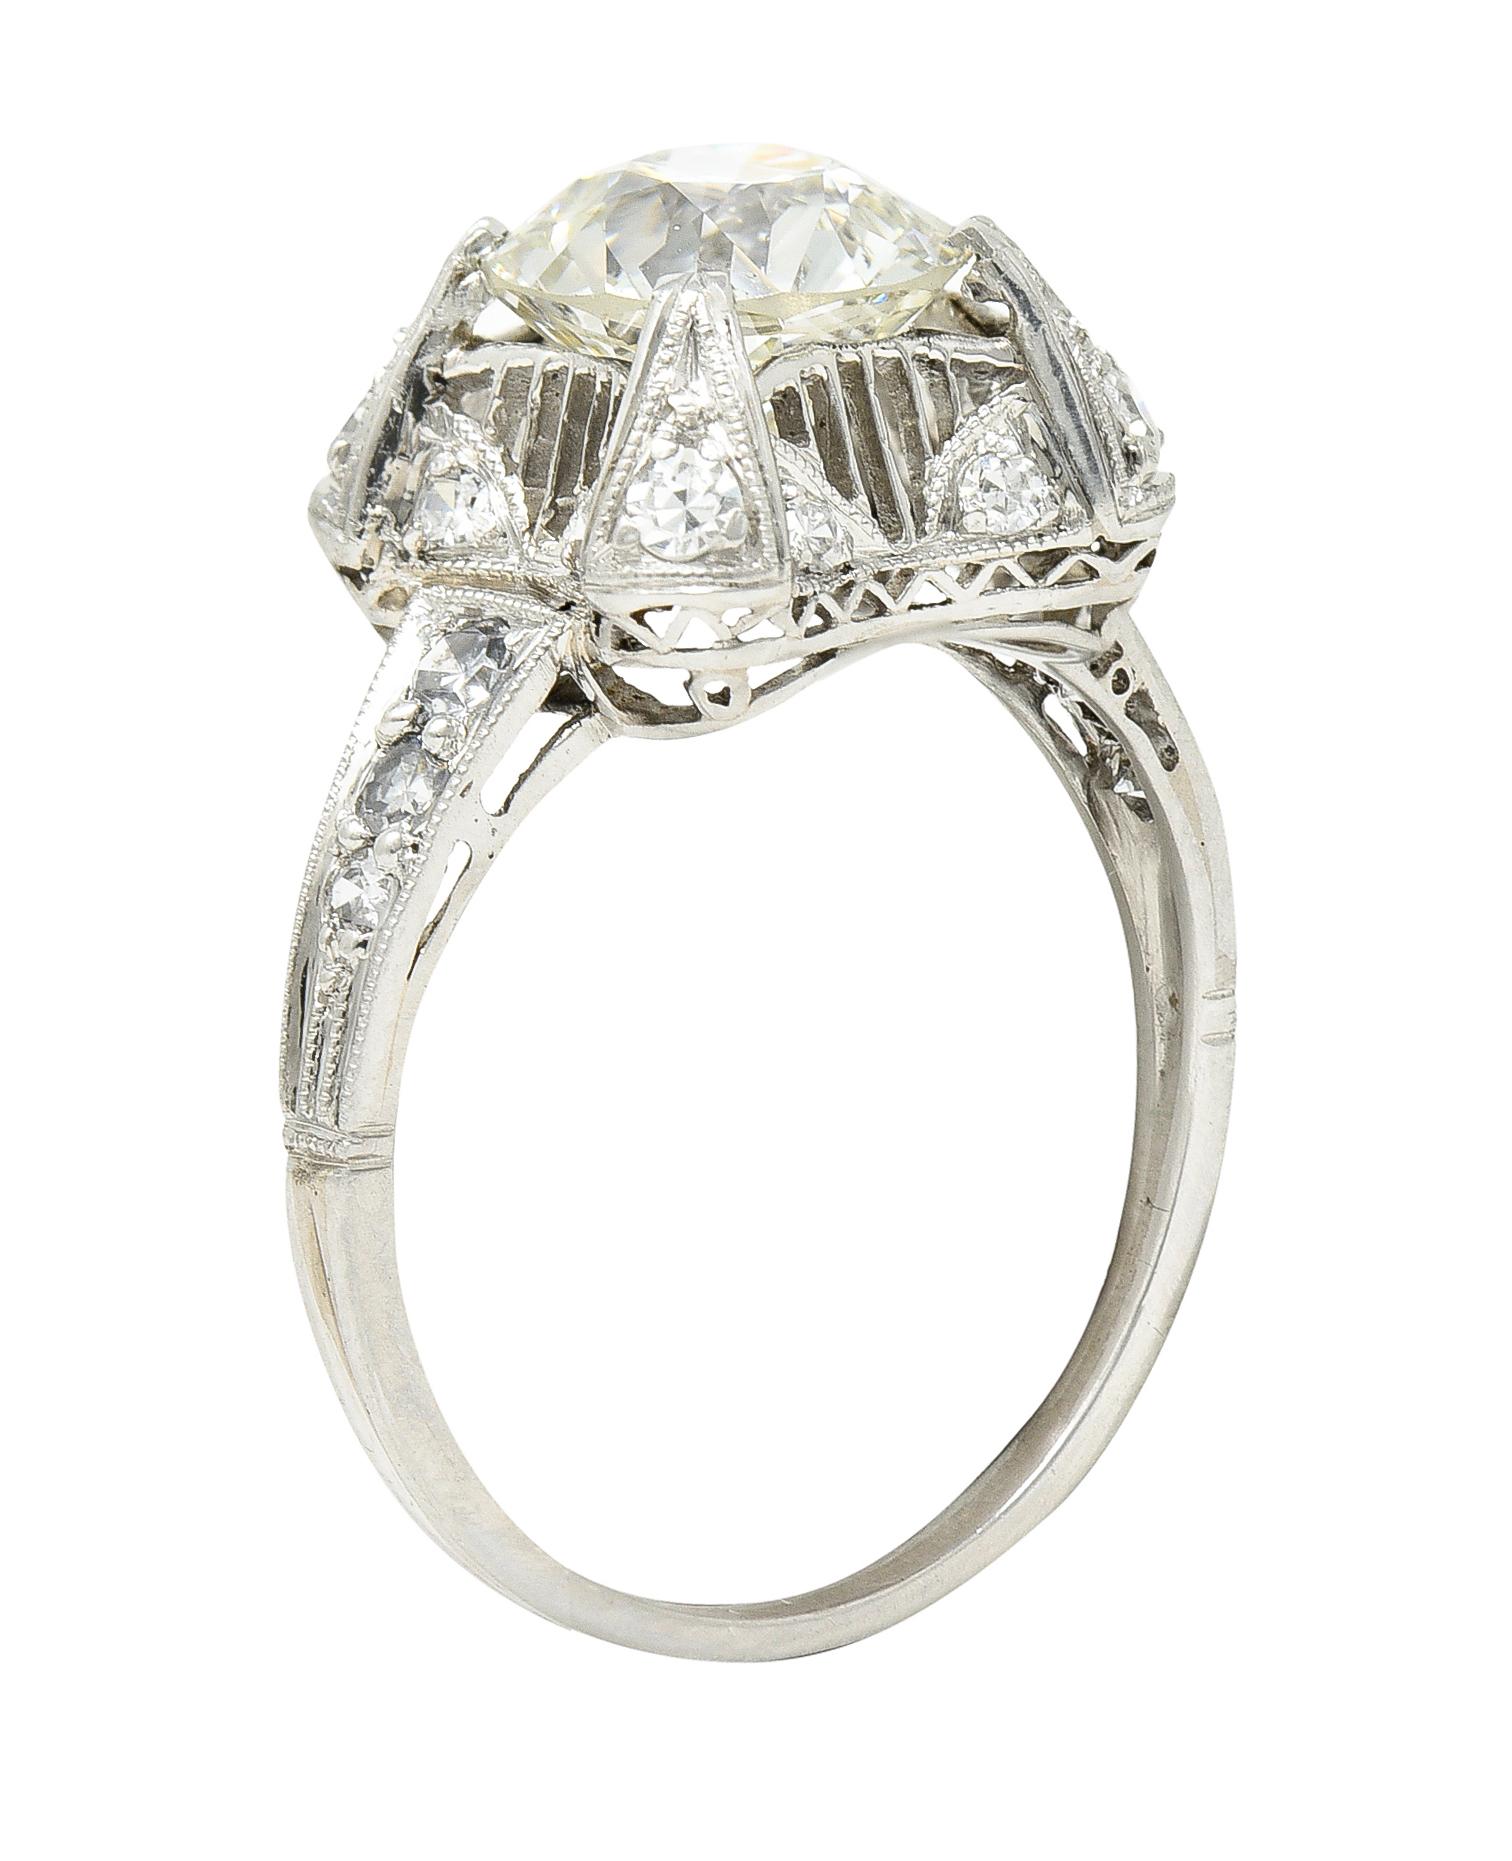 Centering an old European cut diamond weighing approximately 2.13 carats total - K color with VS1 clarity. Set with decorous grooved prongs with milgrain detailing in a cushion shaped surround. Featuring pierced linear detailing with geometric